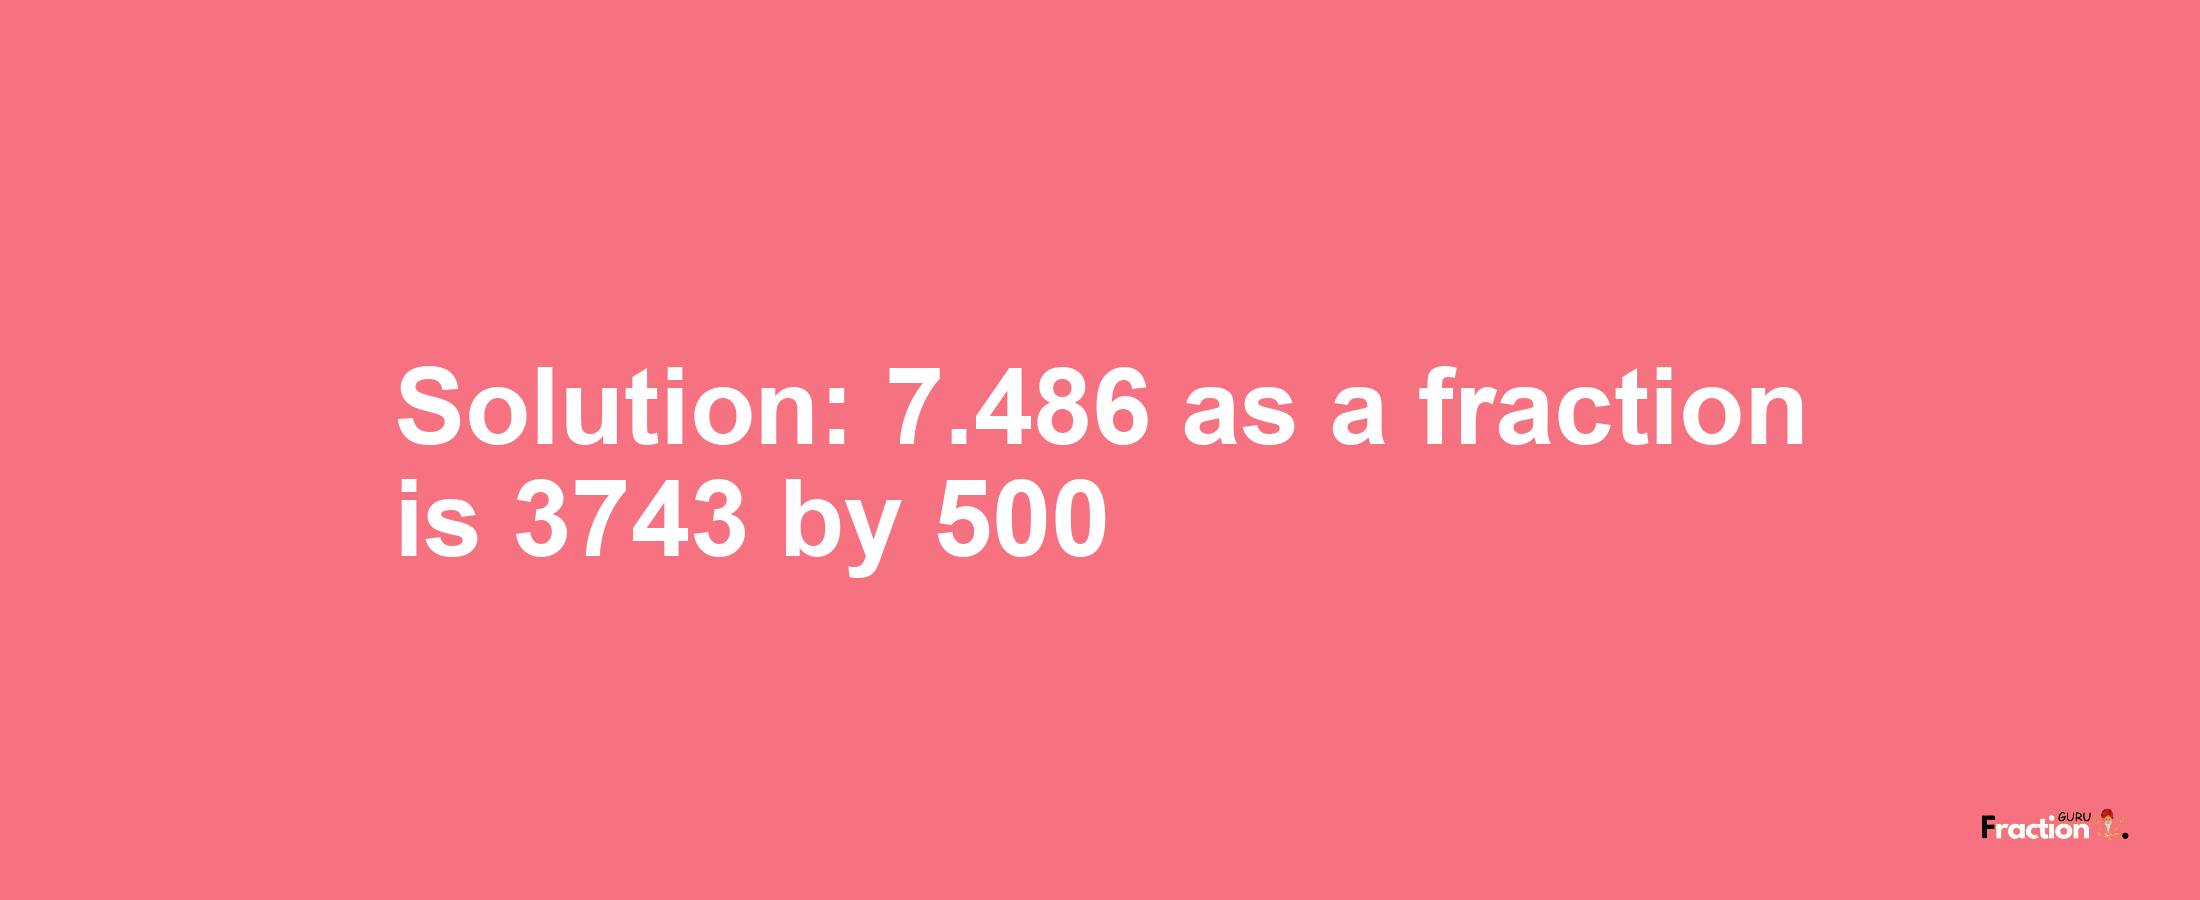 Solution:7.486 as a fraction is 3743/500